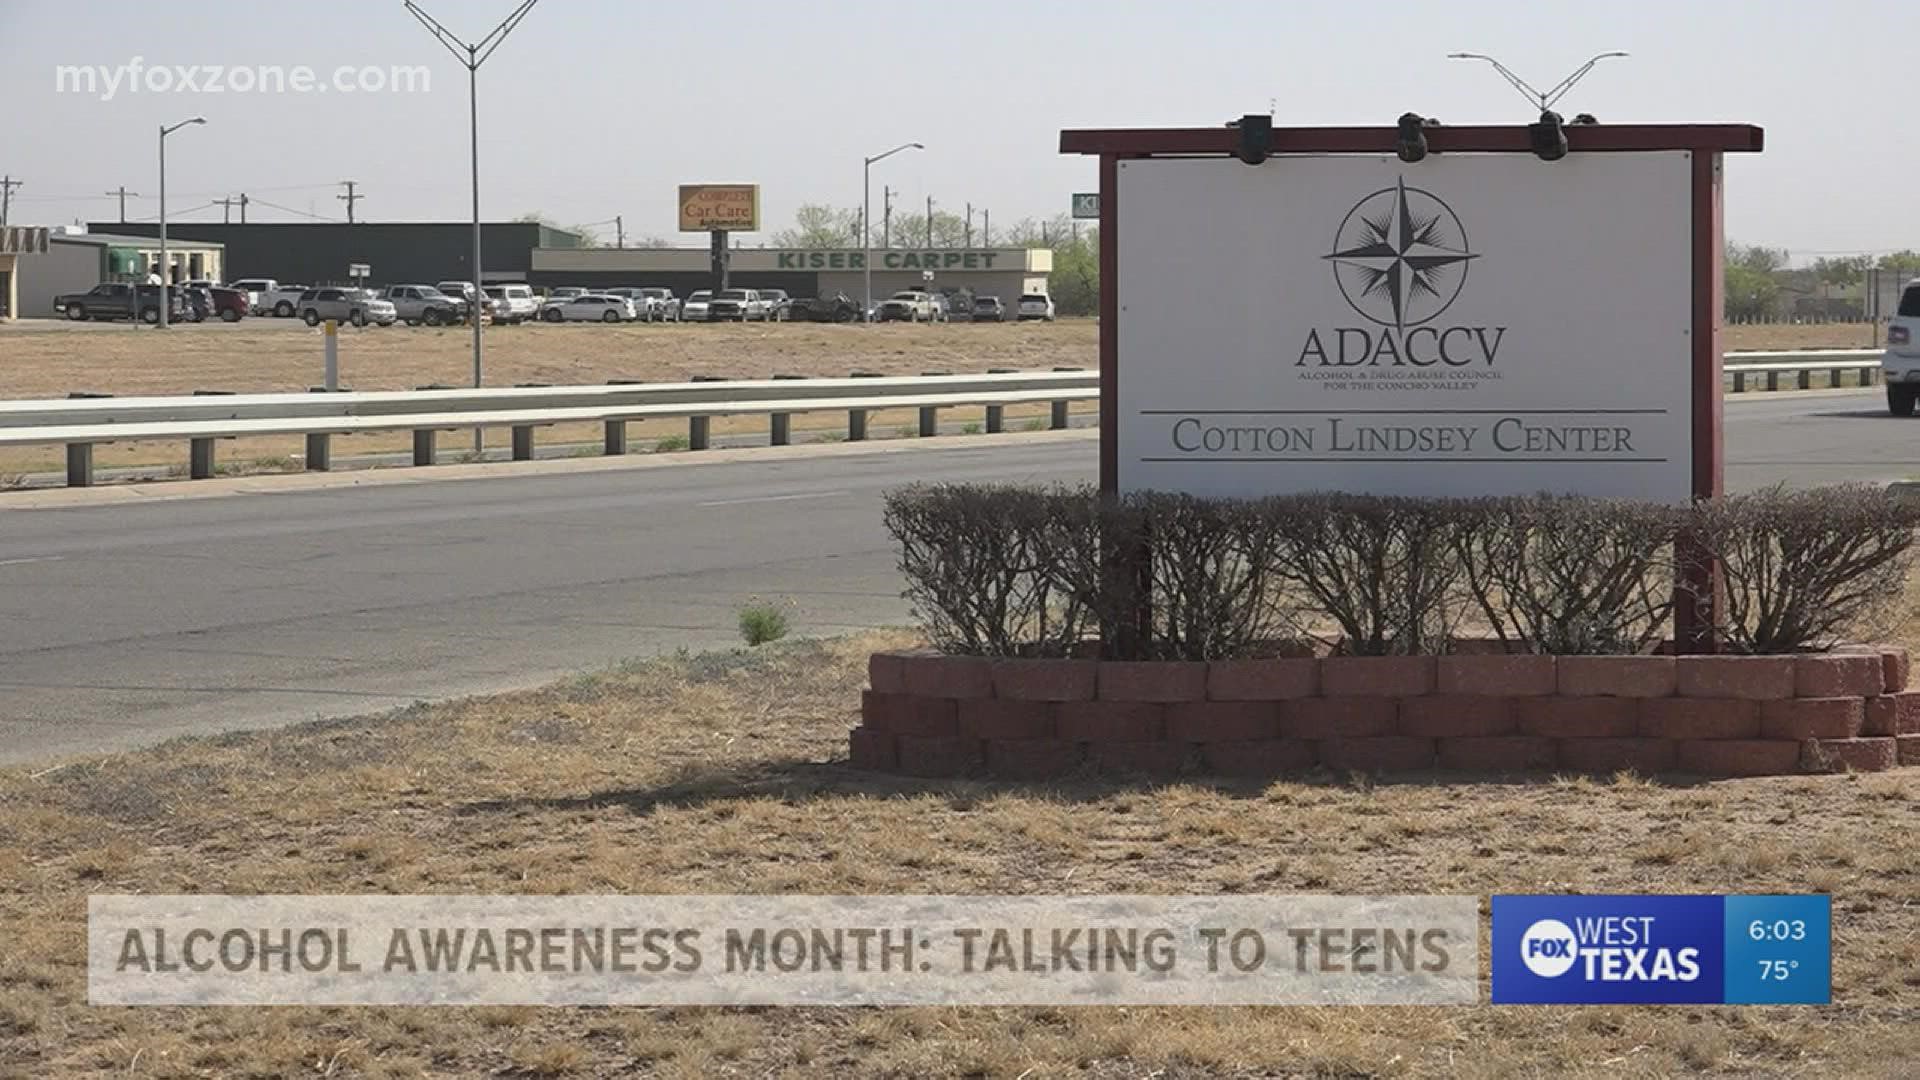 During Alcohol Awareness Month, Triple A and the ADACCV push for teenagers and young adults to drive safe.